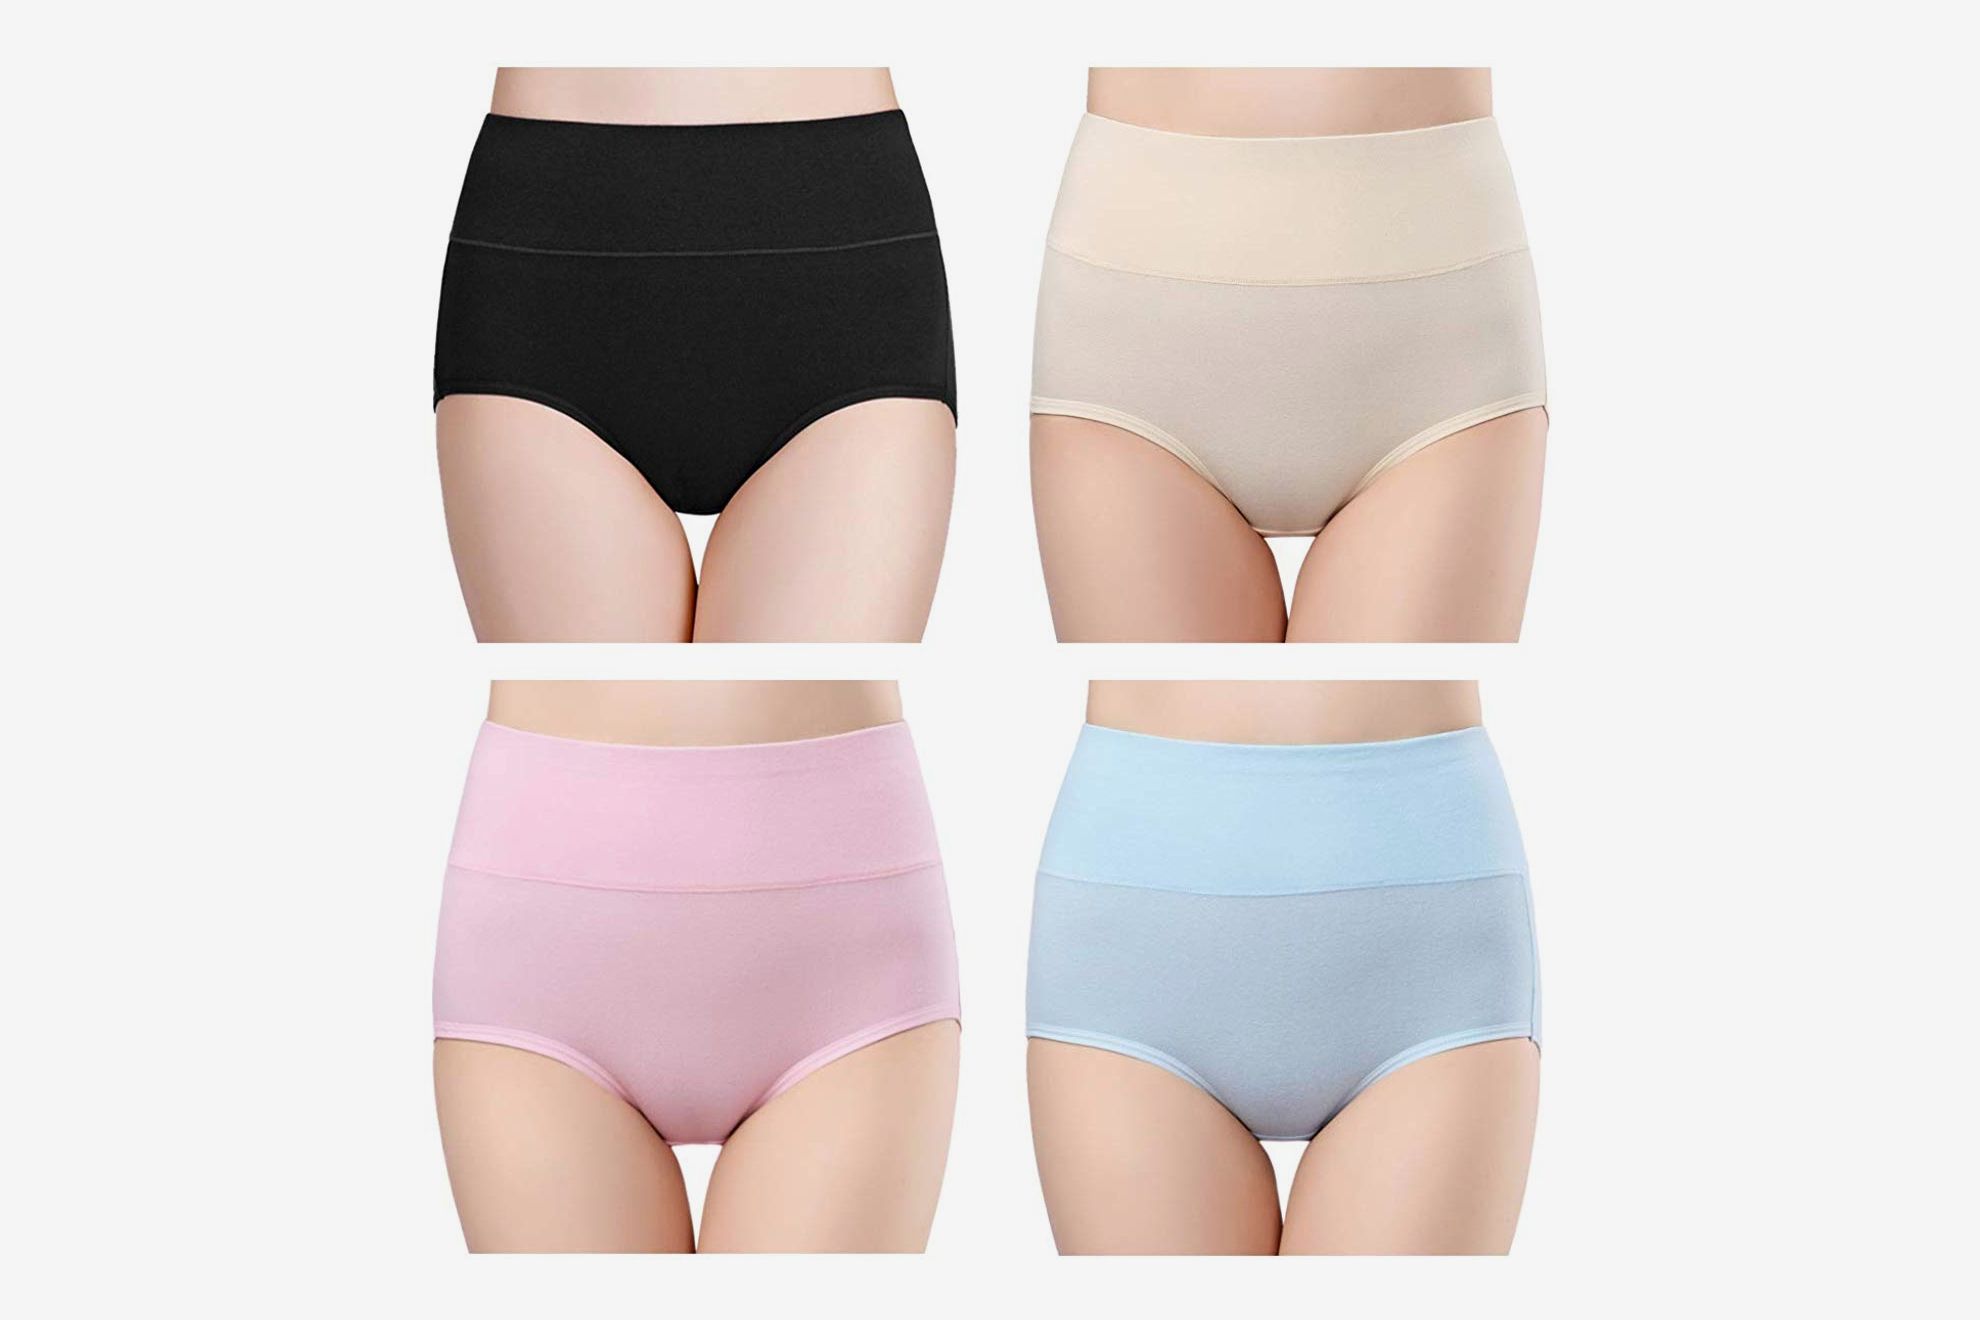 Tummy Control High Waist Lace Soft Breathable Panties for Girls Ladies 4 Multipack Womens Cotton Underwear Stretch Briefs